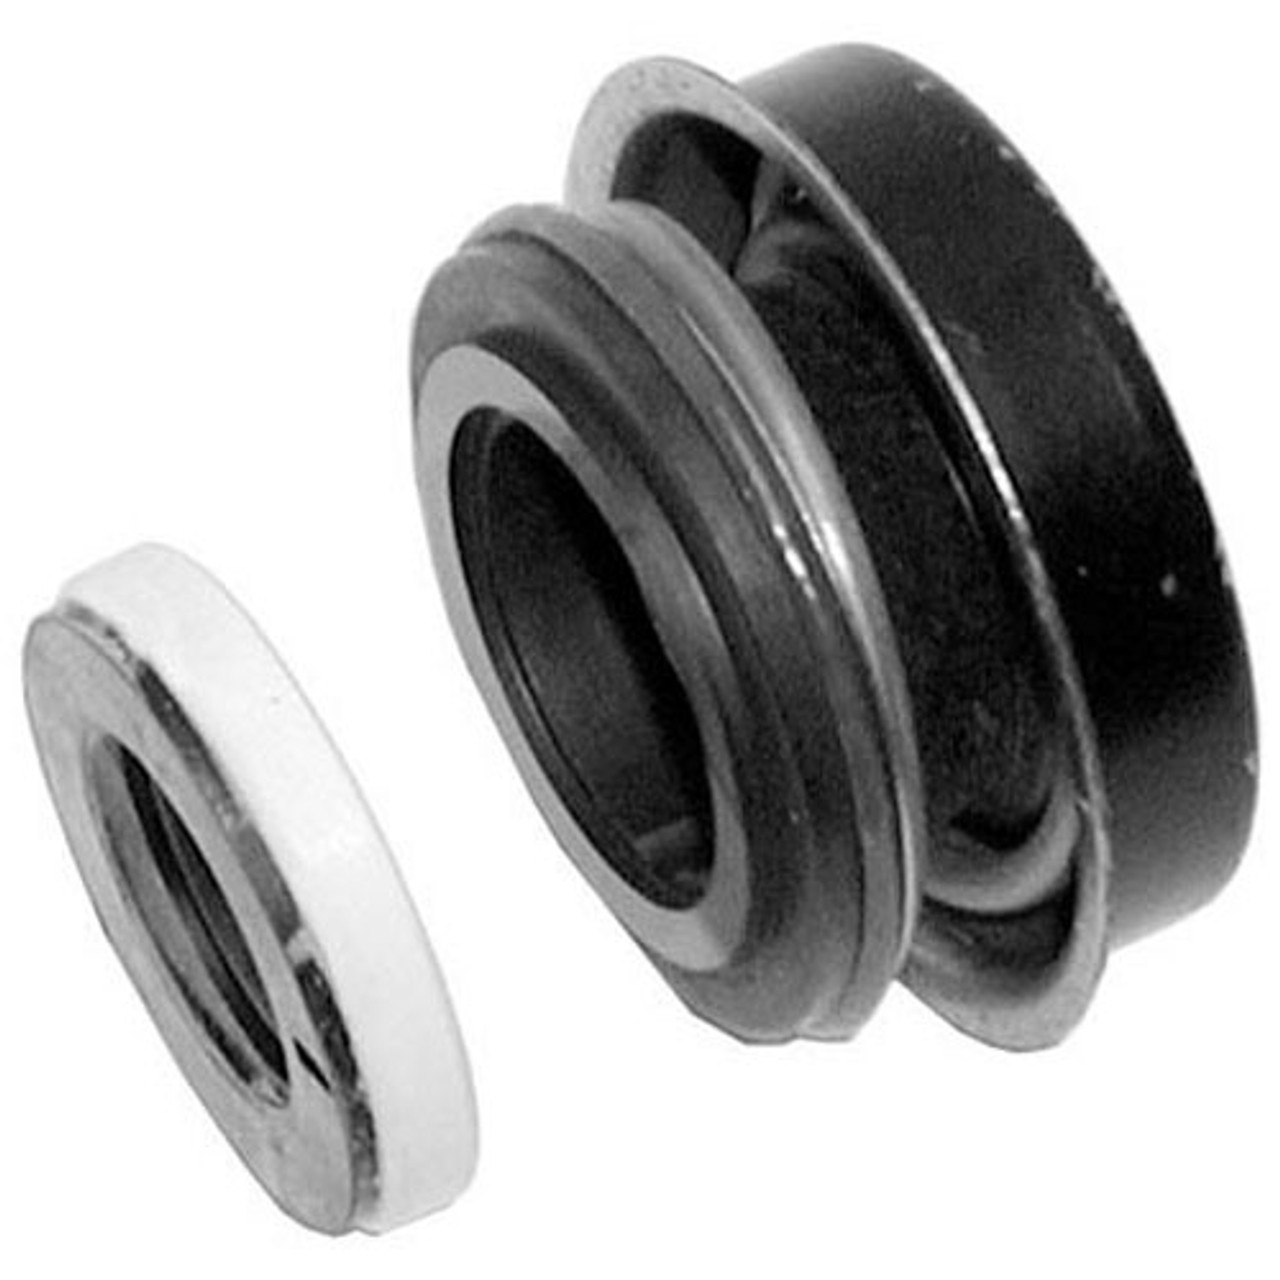 Pump Seal - Replacement Part For Stero 0P-571030